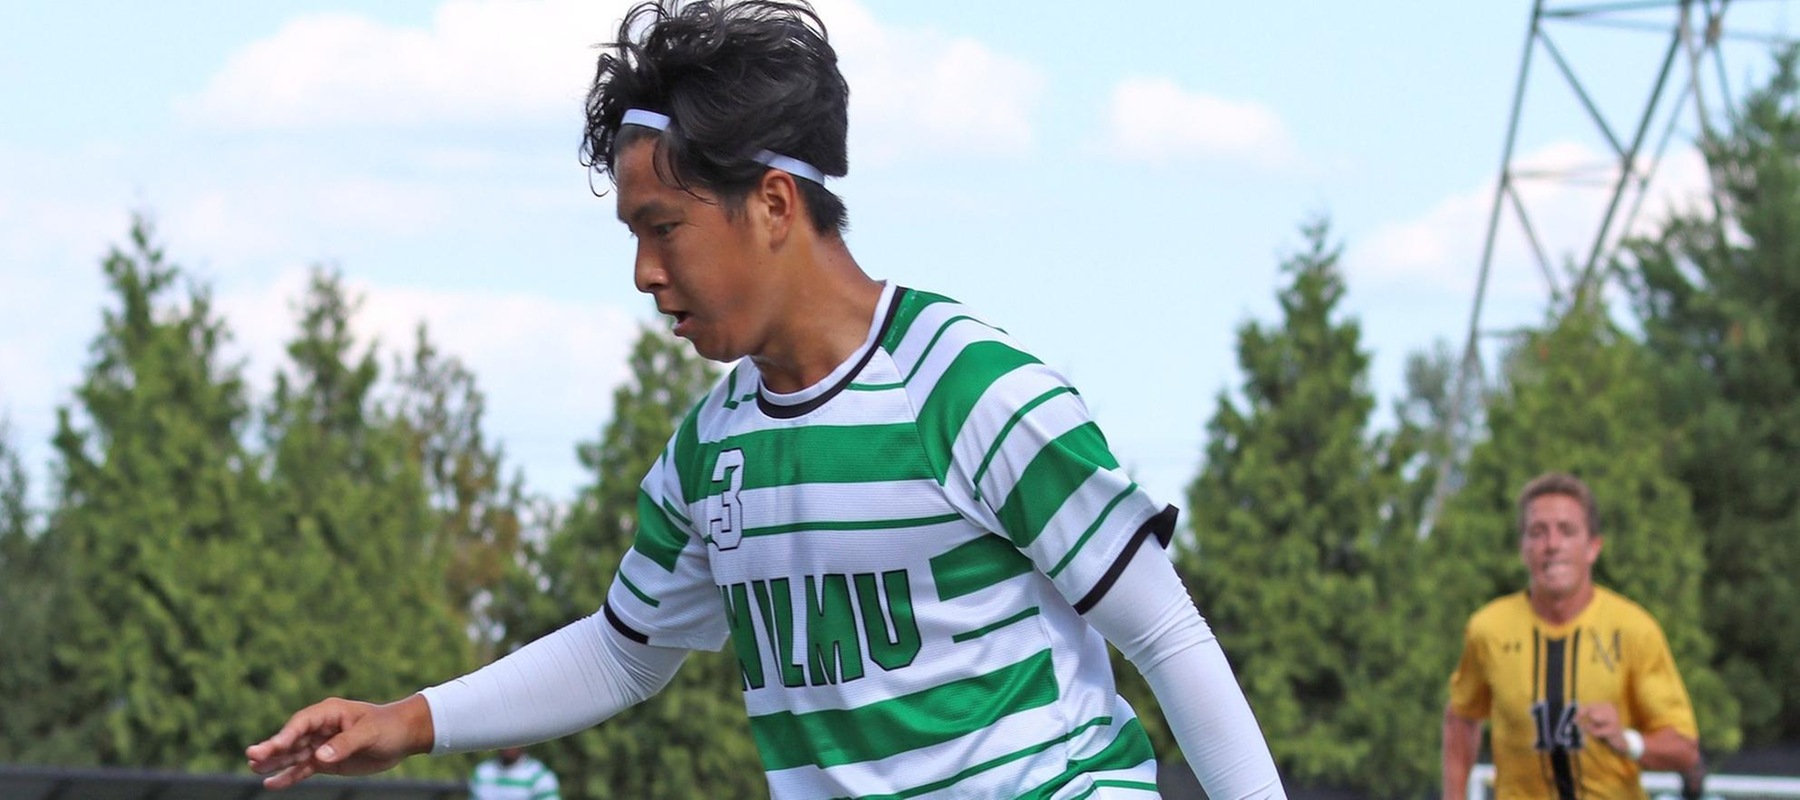 File photo of Yohan Kim who scored his first goal of the year at Bentley. Copyright 2022; Wilmington University. All rights reserved. Photo by Trudy Spence. August 31, 2022 vs. Millersville.